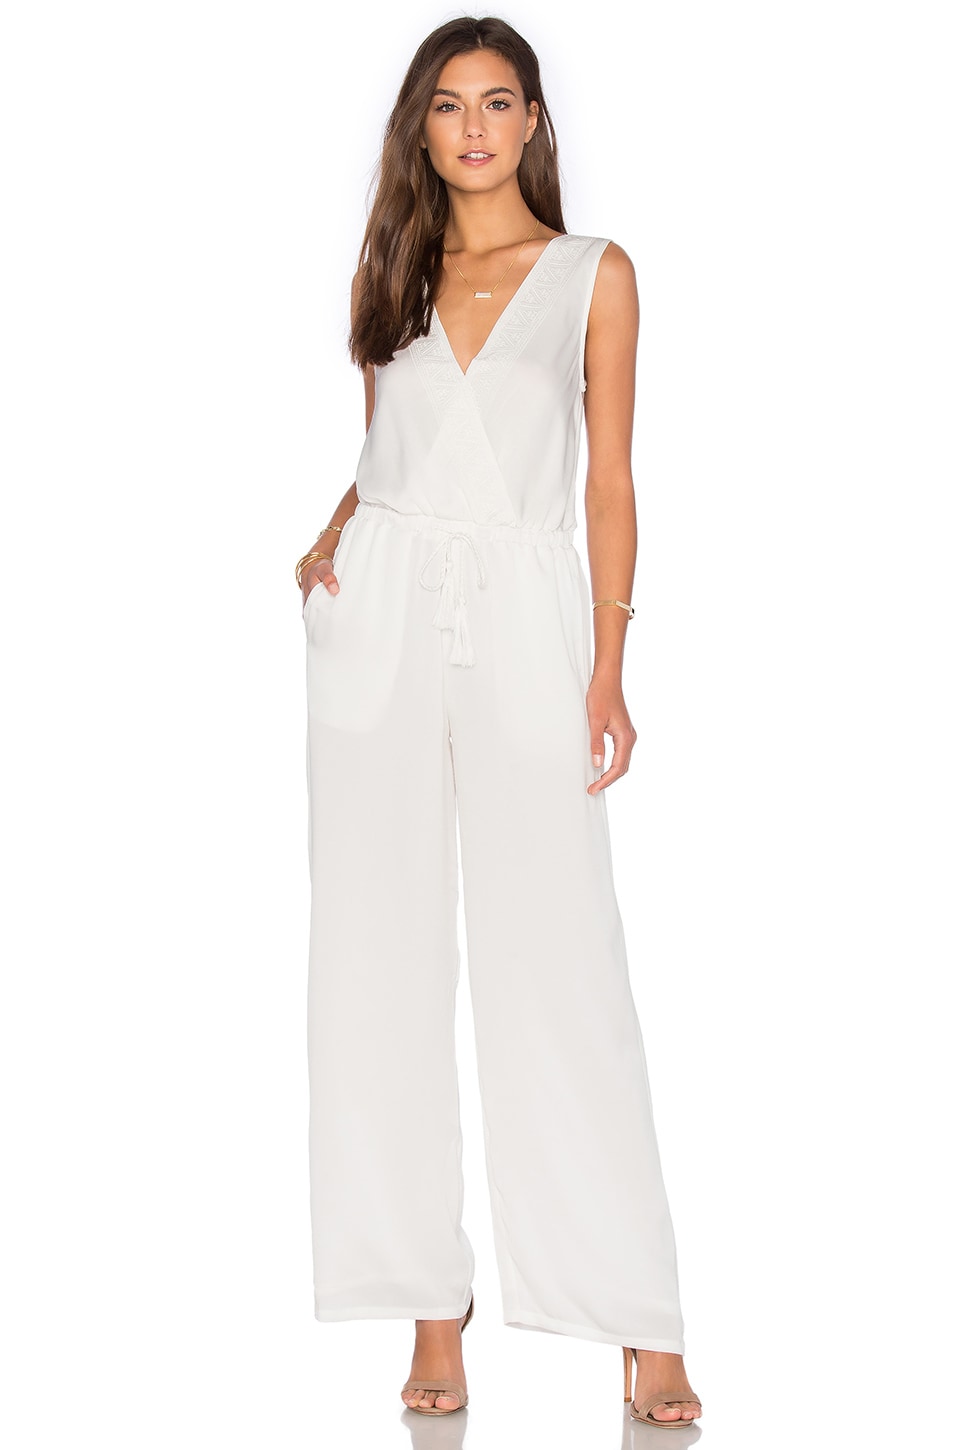 Capulet Cross Front Jumpsuit in White Embroidered | REVOLVE